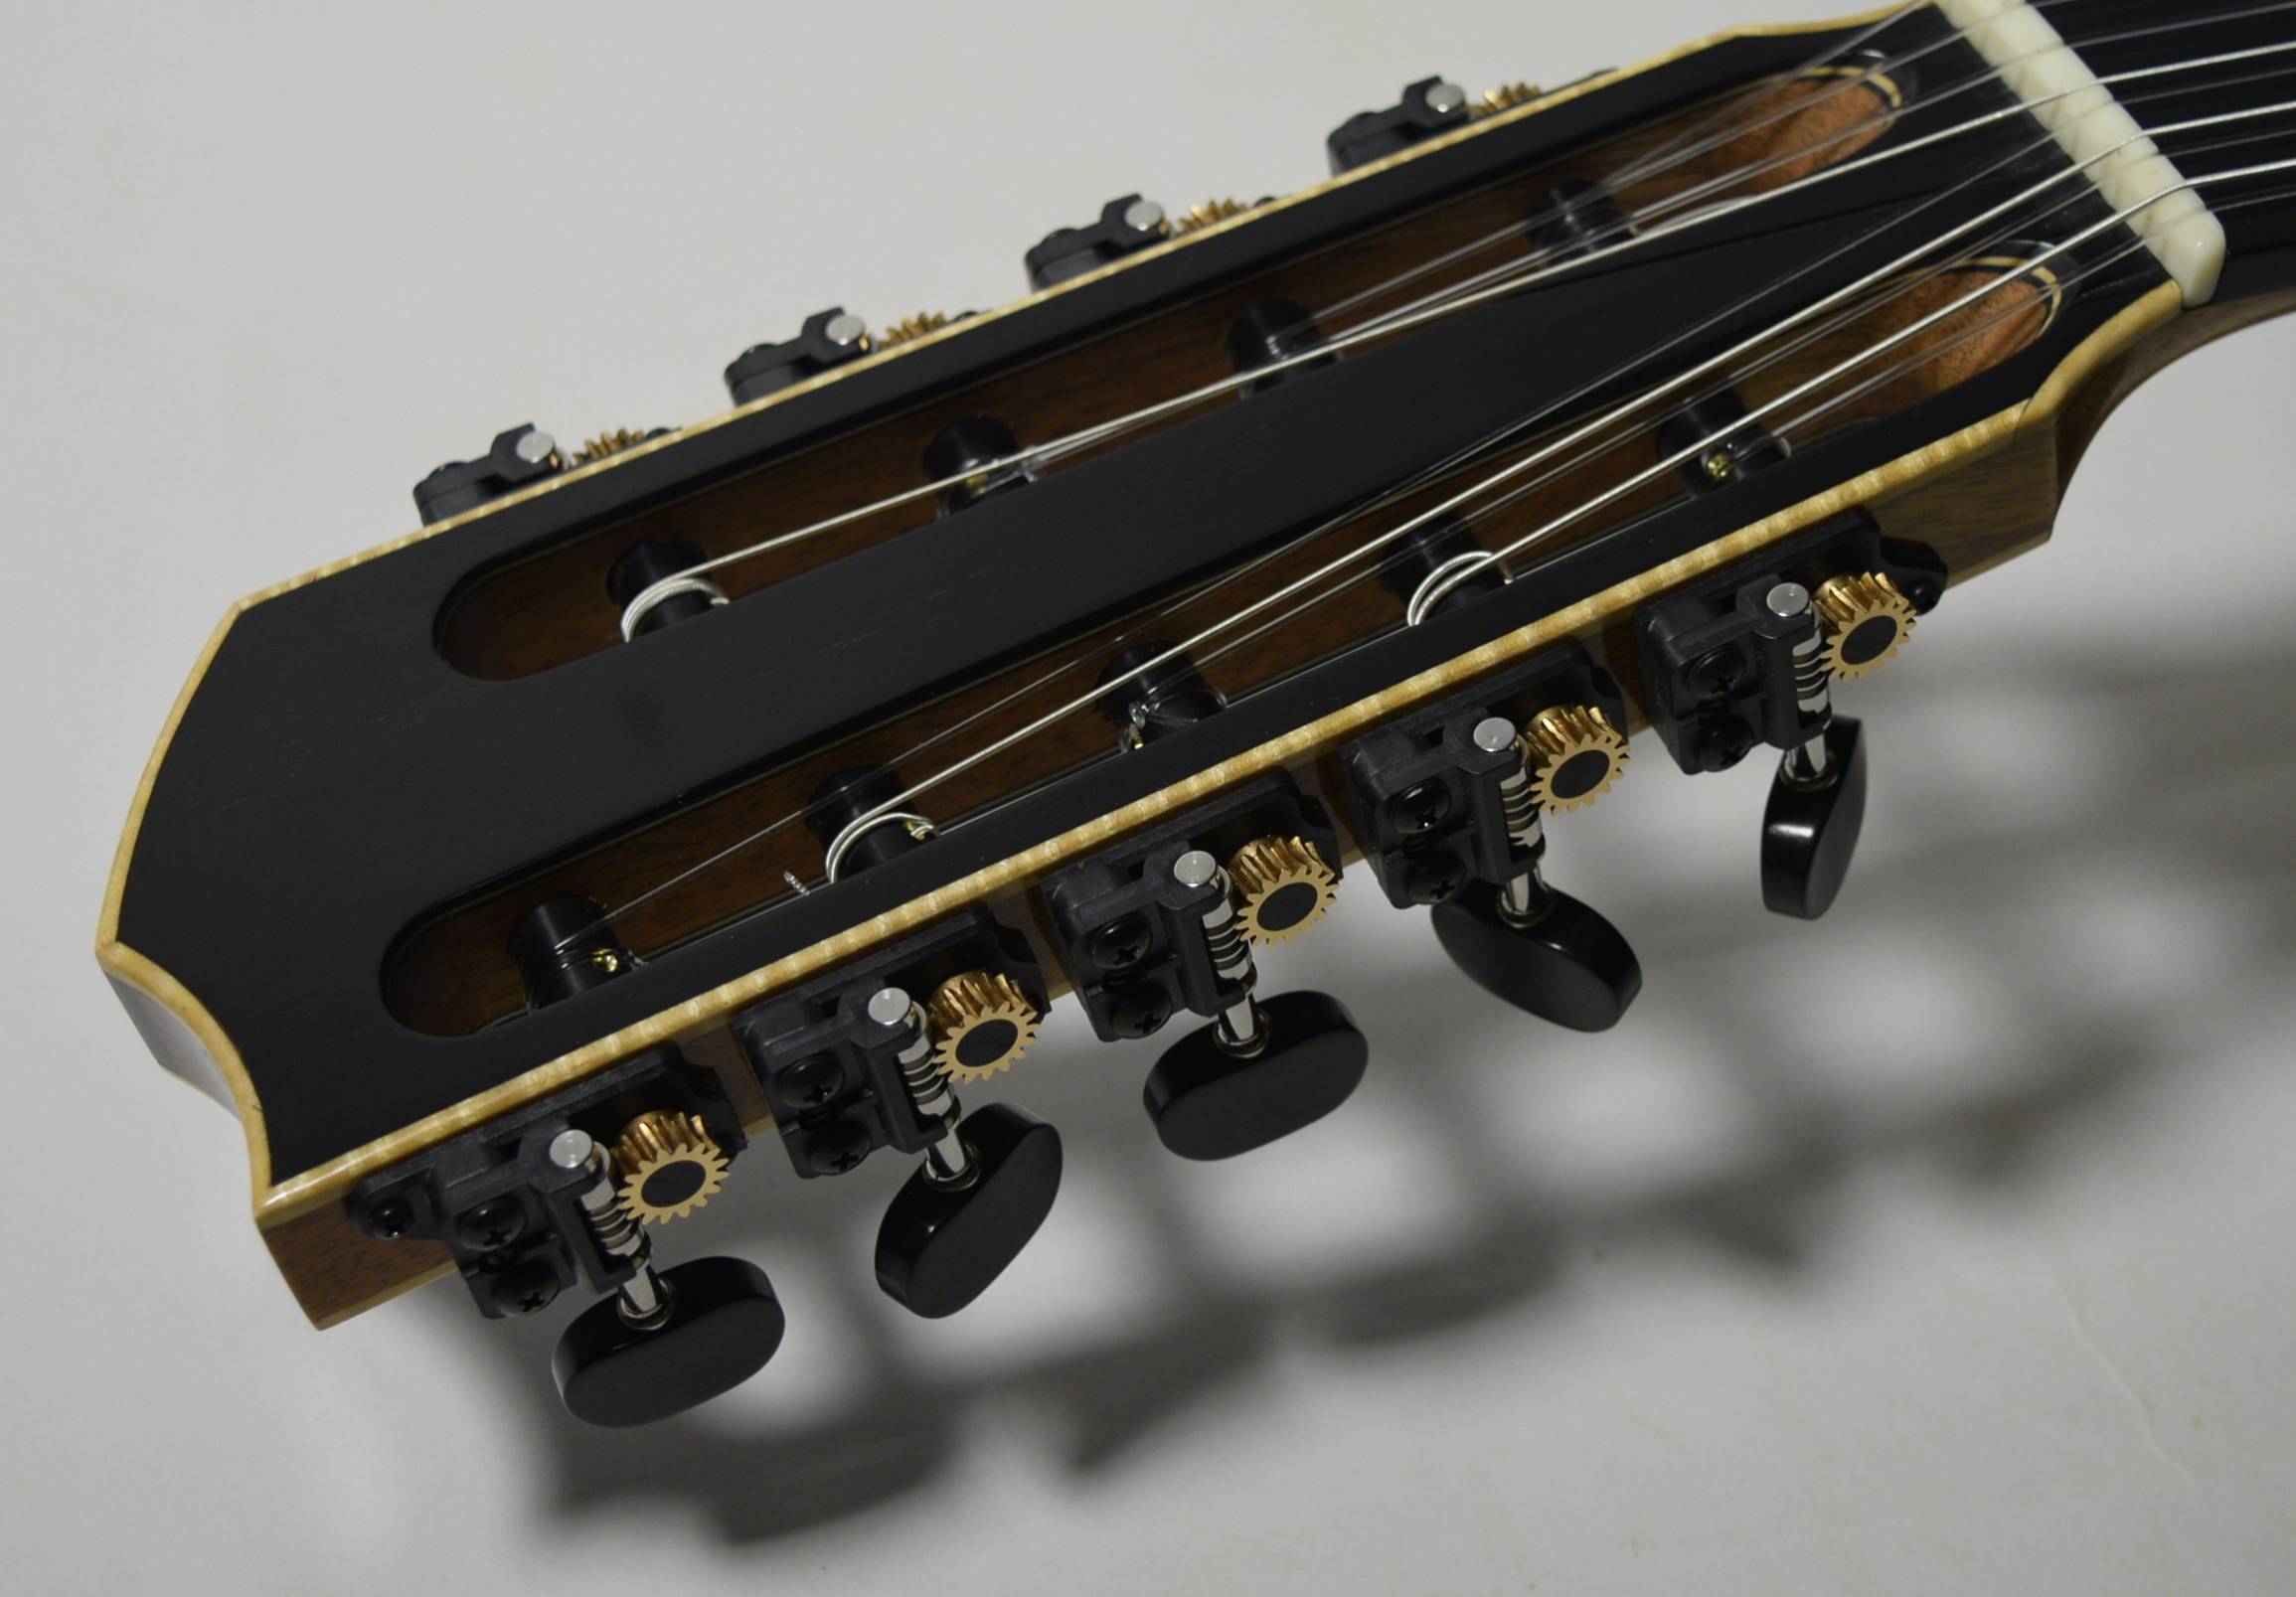 A nine string modern guitar for the barque repertoire